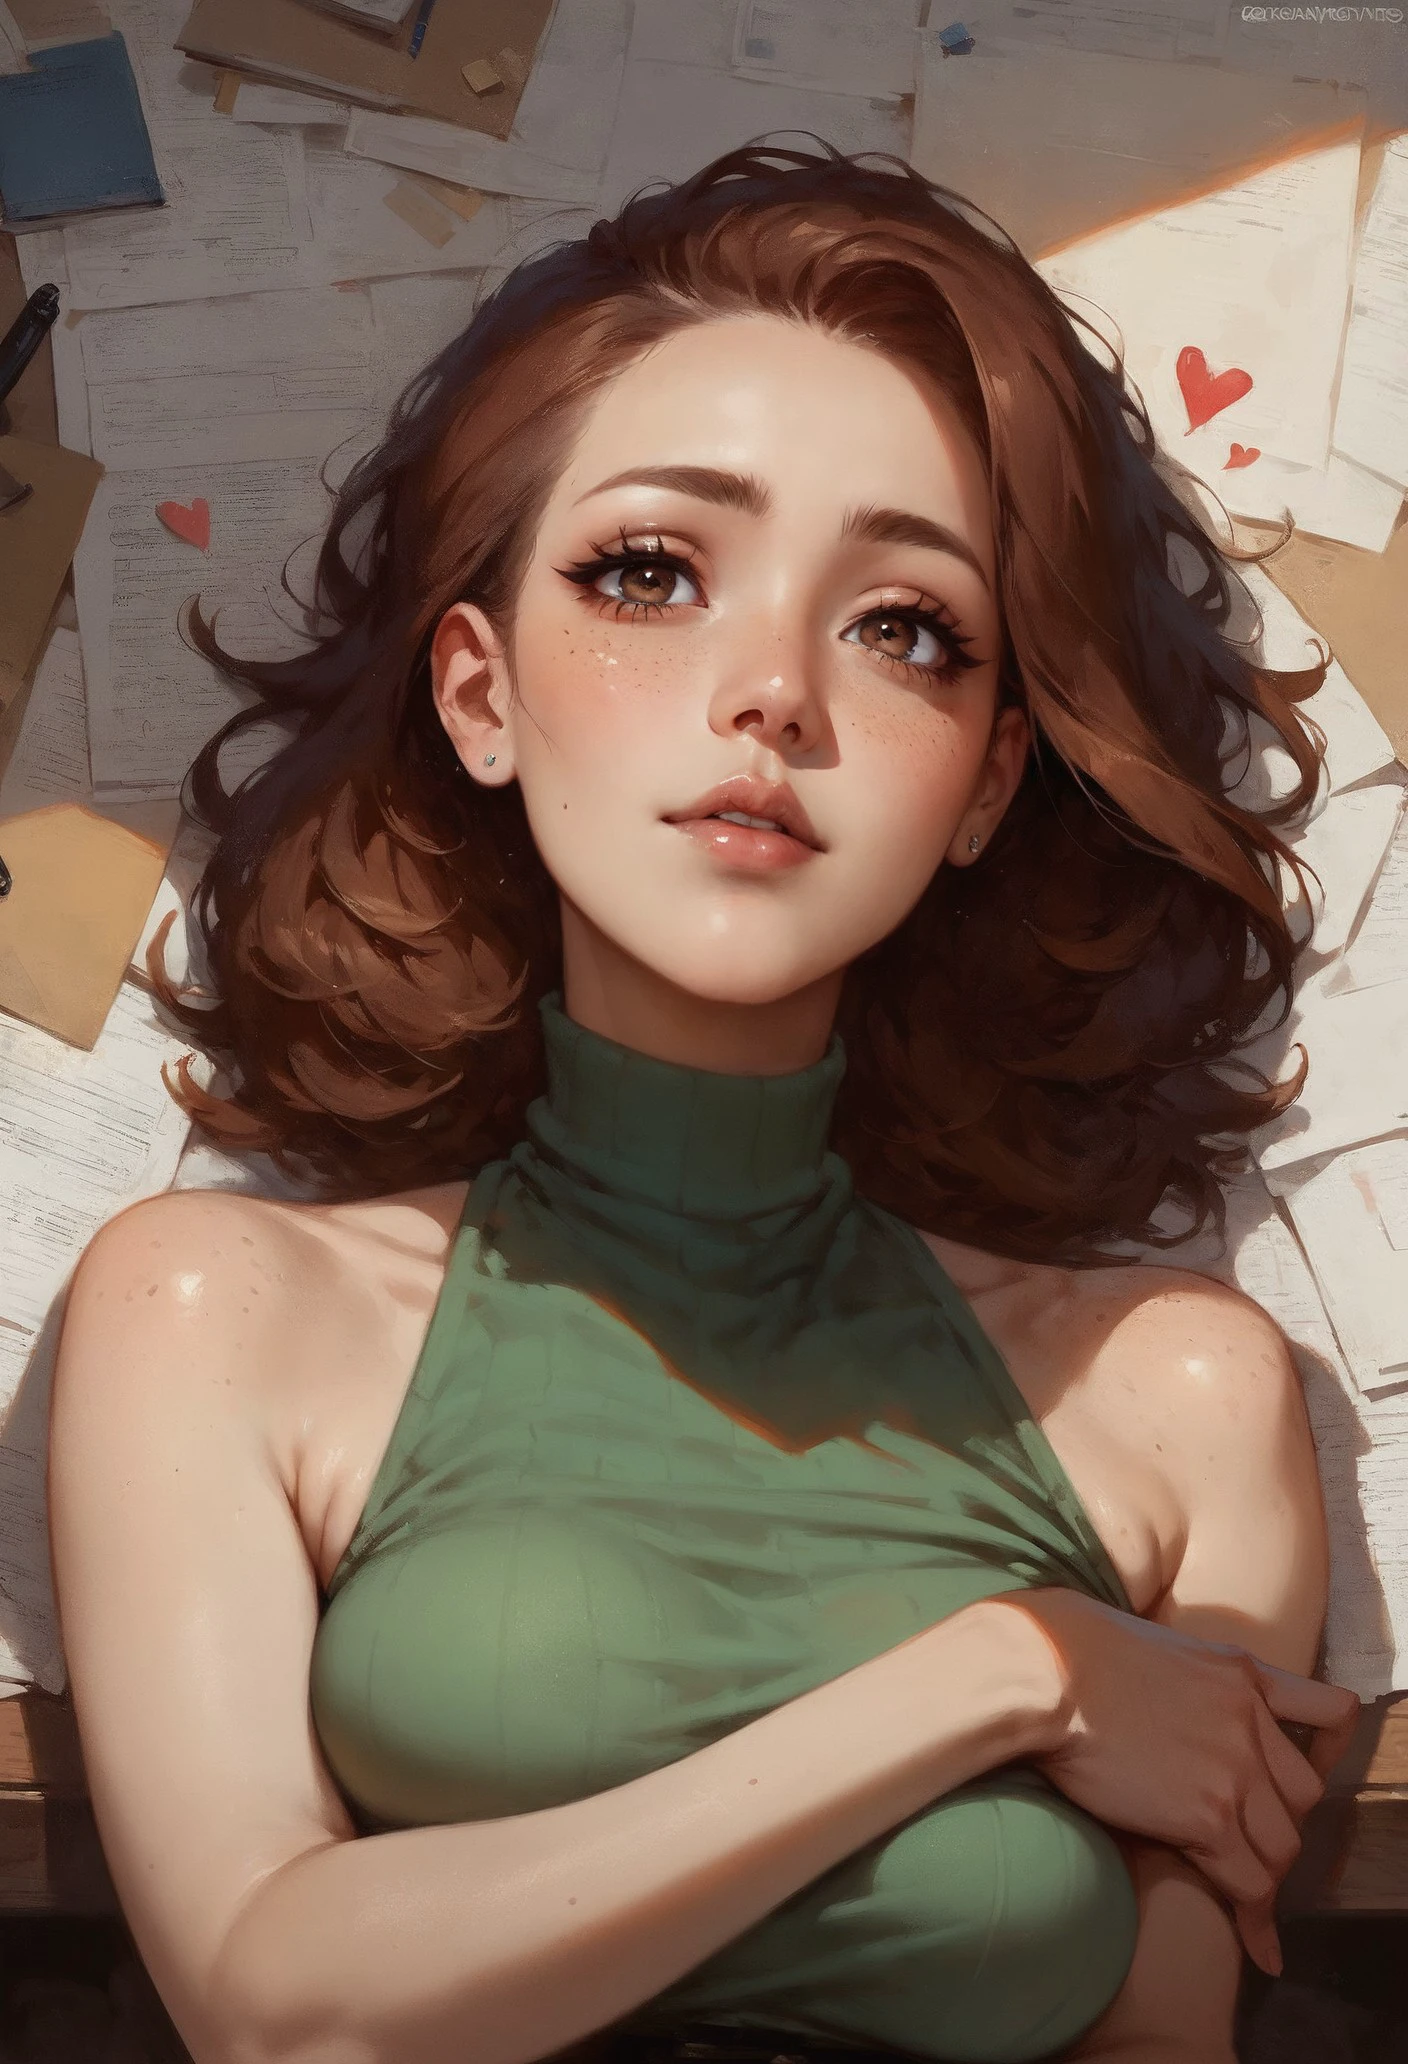 score_9, score_8_up, score_7_up,  1girl, solo, expressive, hearts, dynamic, brown hair, brown eyes, pale skin girl, pale skin, freckles, green turtleneck, cozy, blush, in_office, looking_longingly, seductive, sexy_woman, cuddling giant dick  